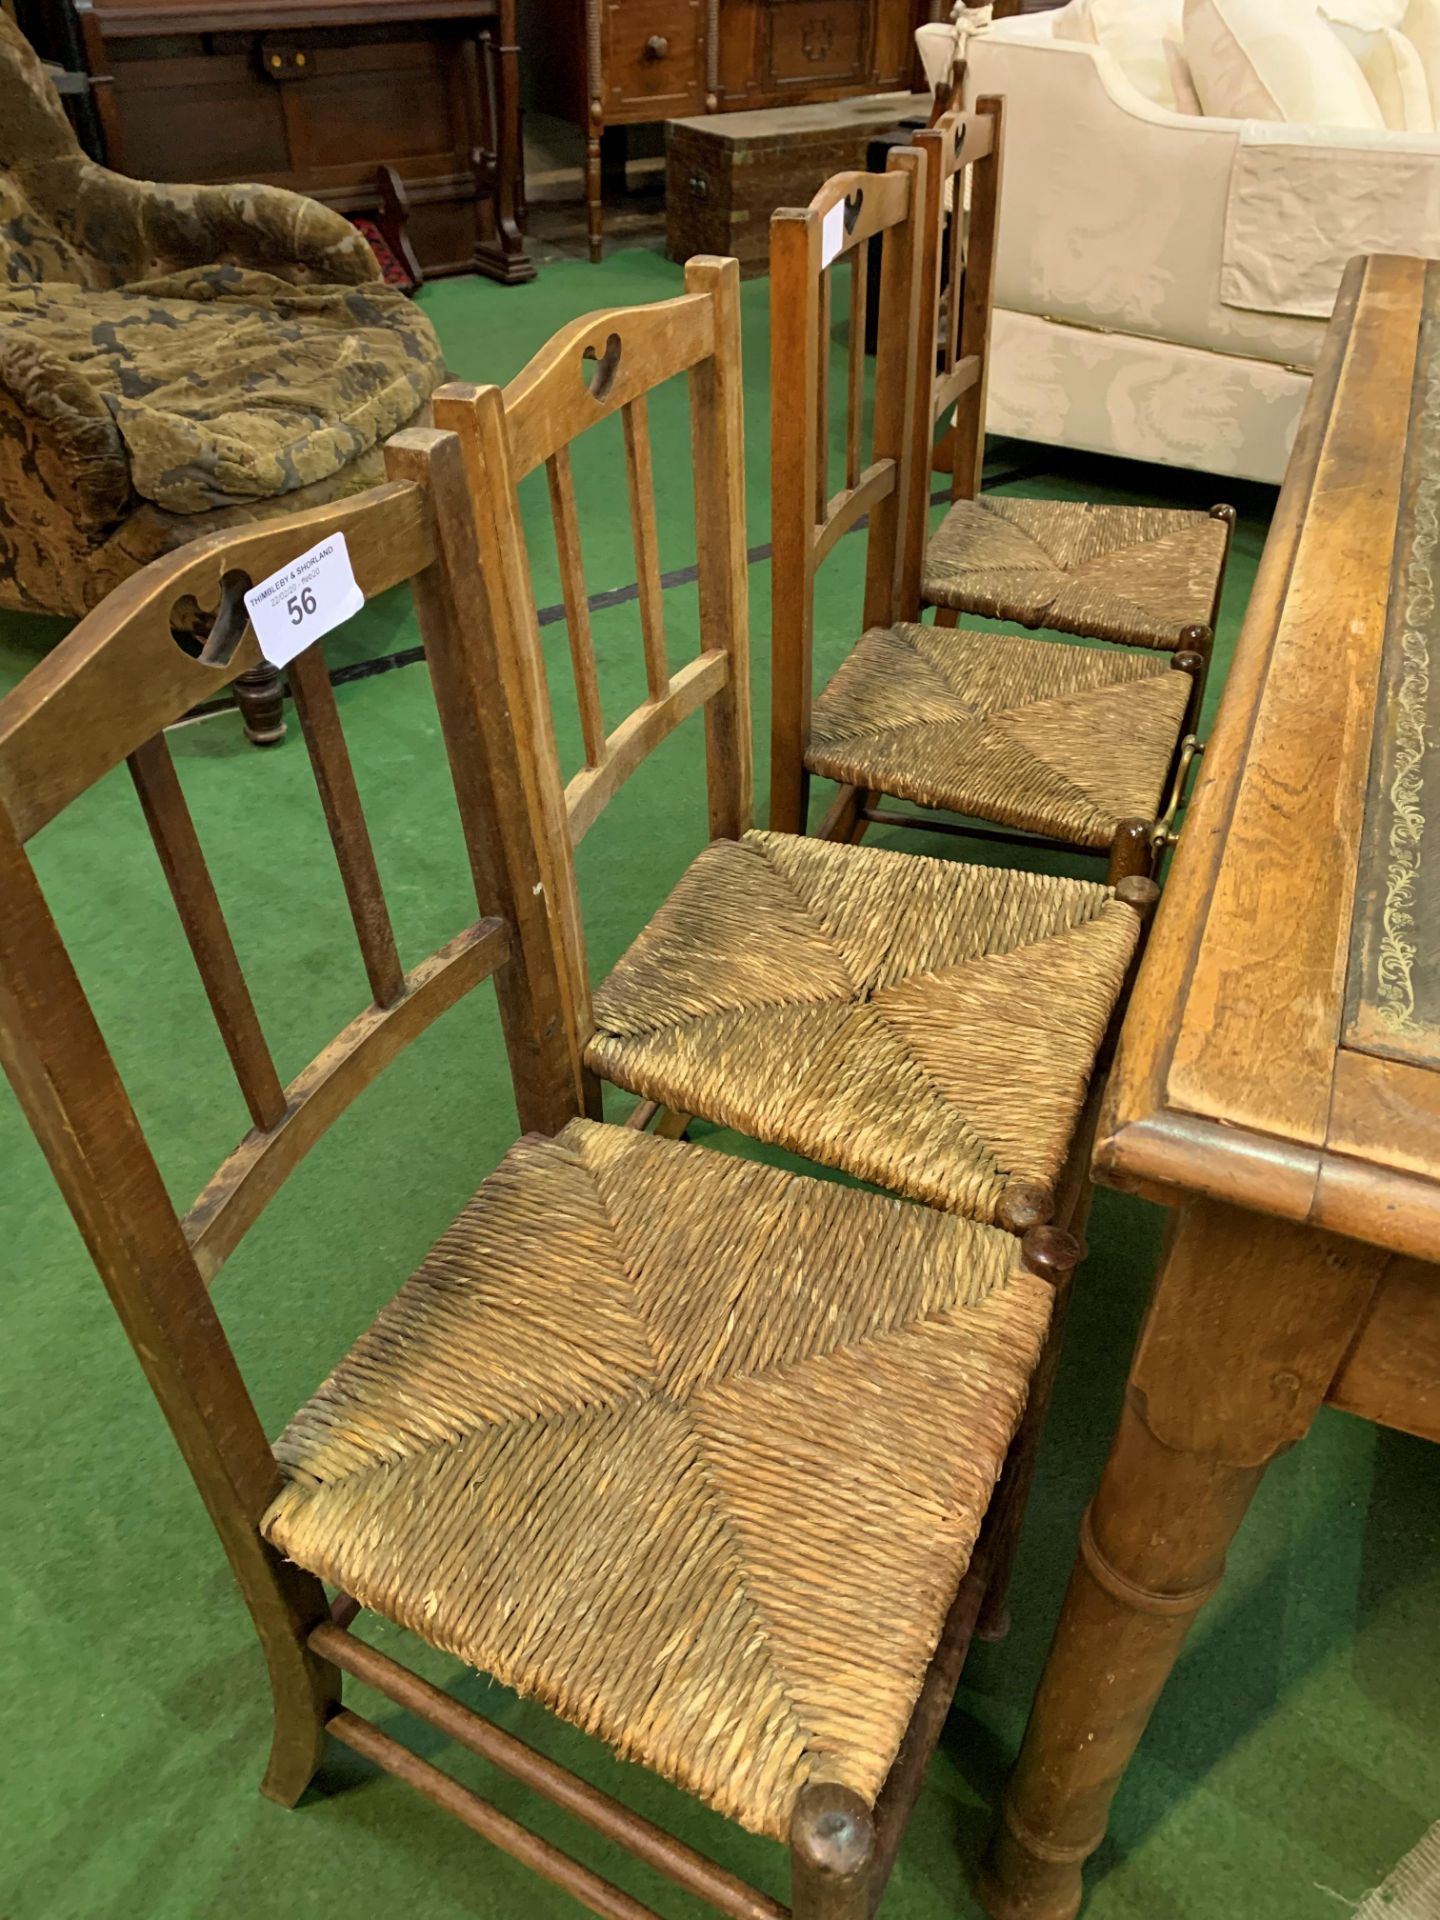 4 string seat chairs. Estimate £10-20. - Image 4 of 4